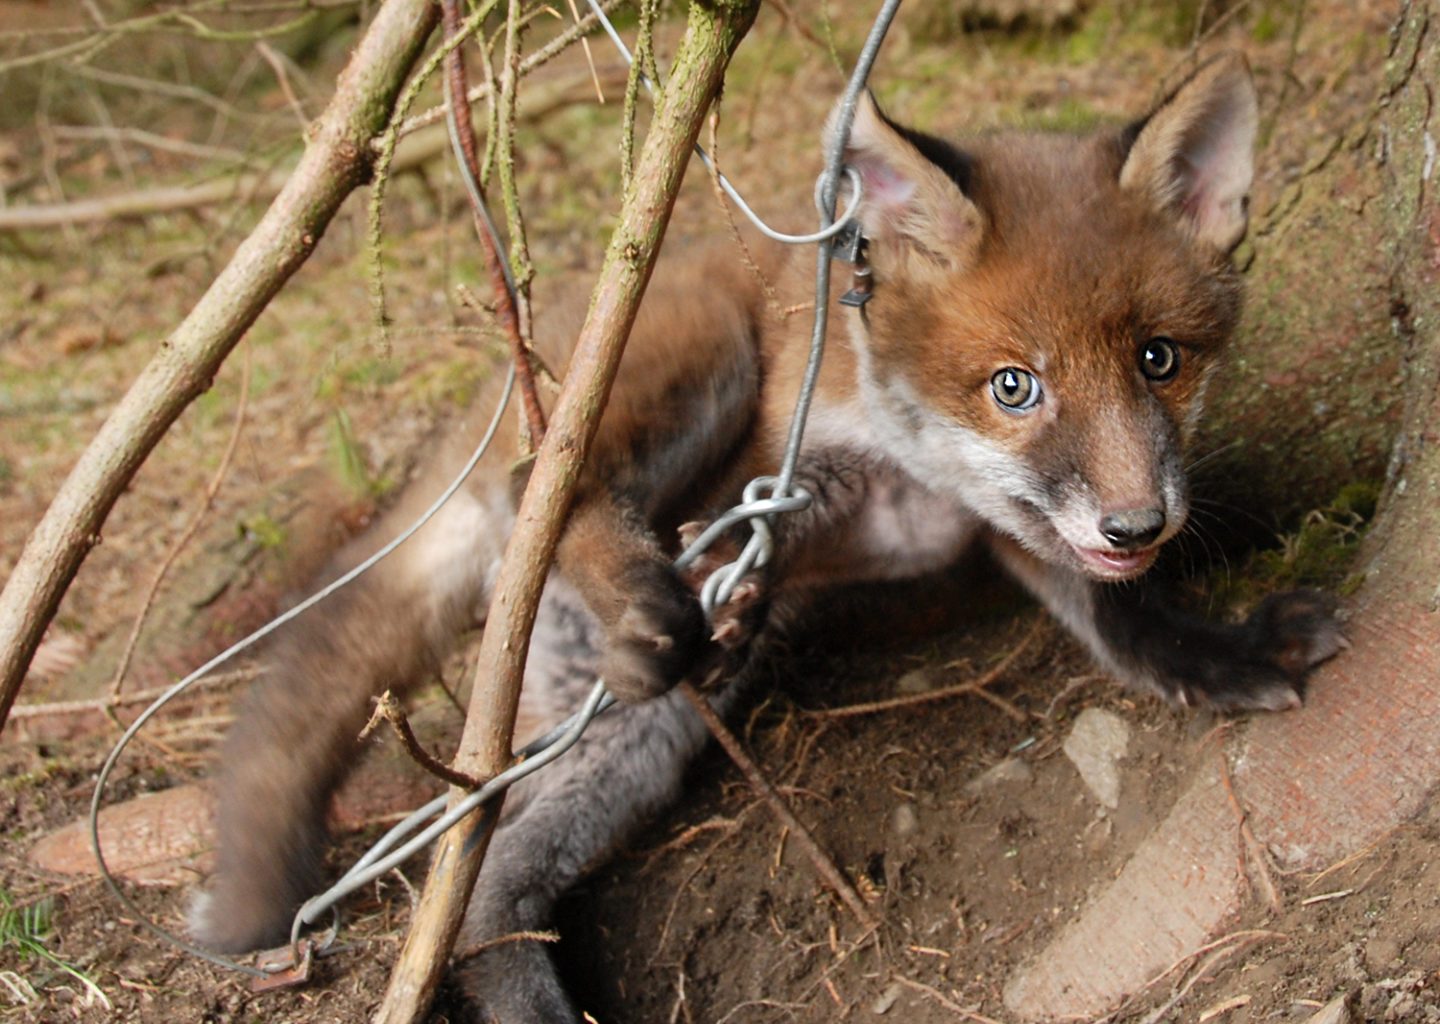 Snare traps killing and injuring pets and protected species, claims report 7